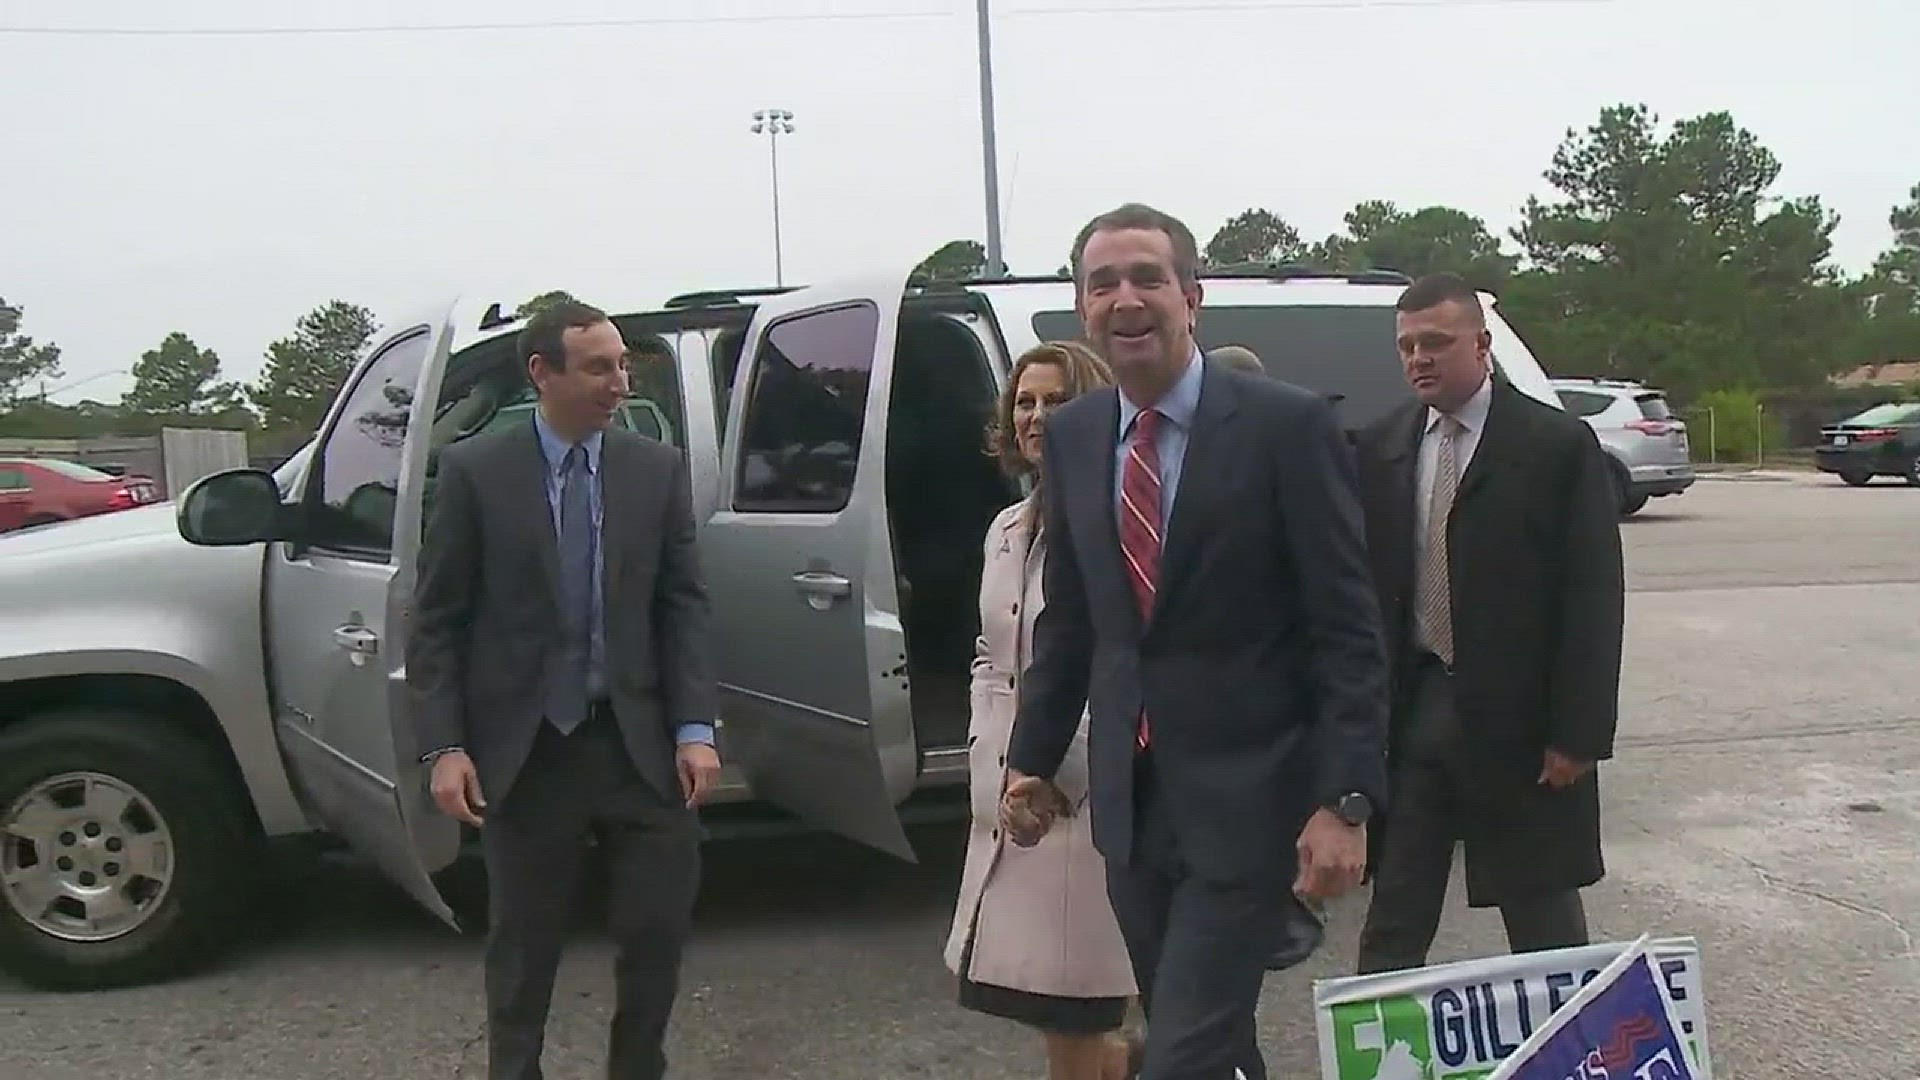 Democratic gubernatorial candidate Ralph Northam and his wife cast their ballots in Norfolk on election.